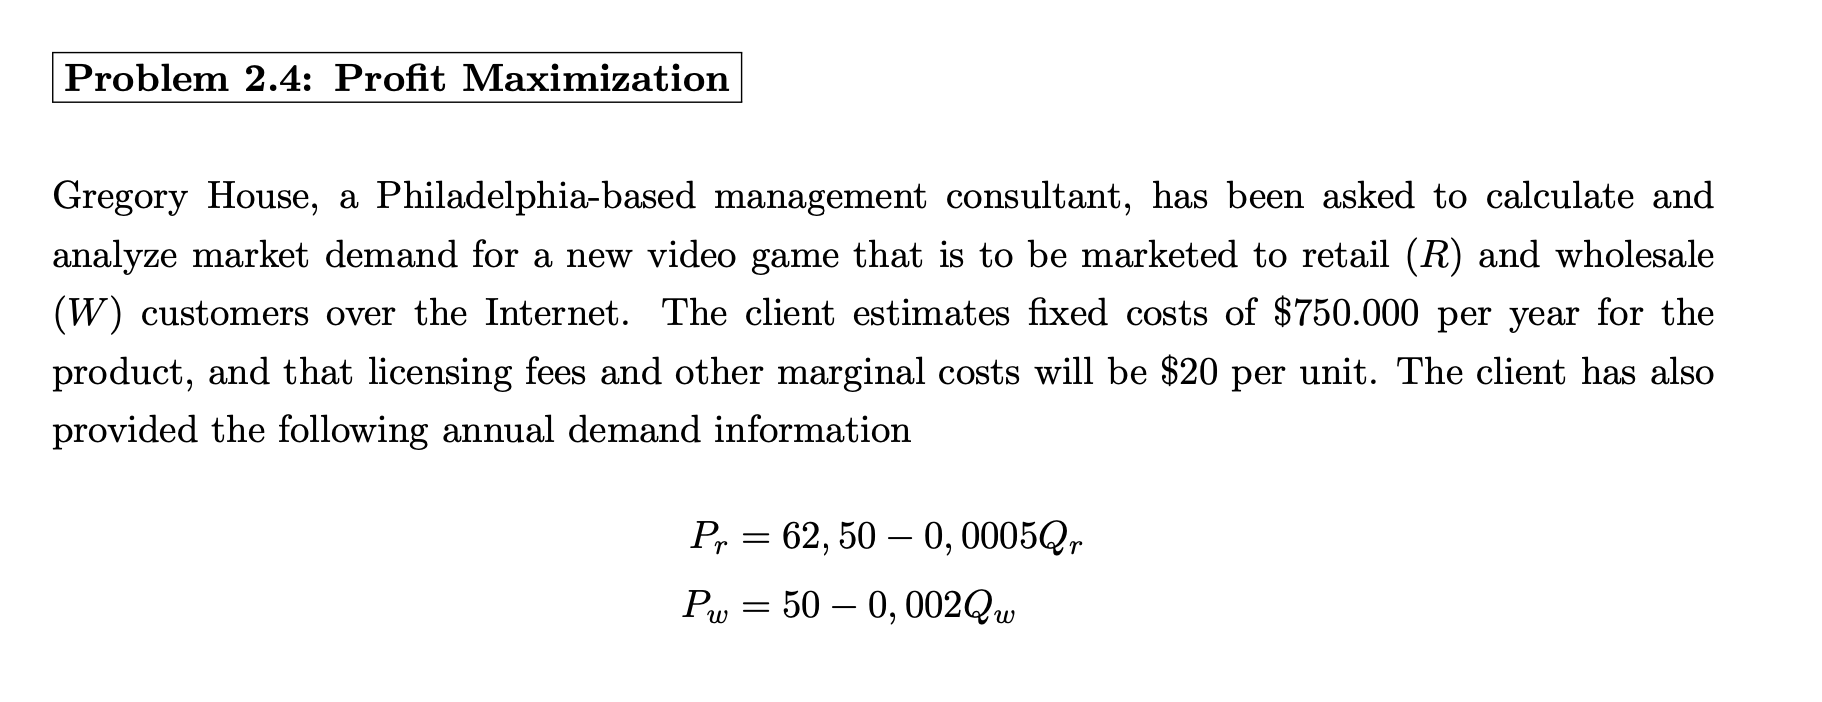 |Problem 2.4: Profit Maximization
Gregory House, a Philadelphia-based management consultant, has been asked to calculate and
analyze market demand for a new video game that is to be marketed to retail (R) and wholesale
(W) customers over the Internet. The client estimates fixed costs of $750.000 per year for the
product, and that licensing fees and other marginal costs will be $20 per unit. The client has also
provided the following annual demand information
Pr = 62, 50 – 0, 0005Q,
Pw = 50 – 0, 002QW
